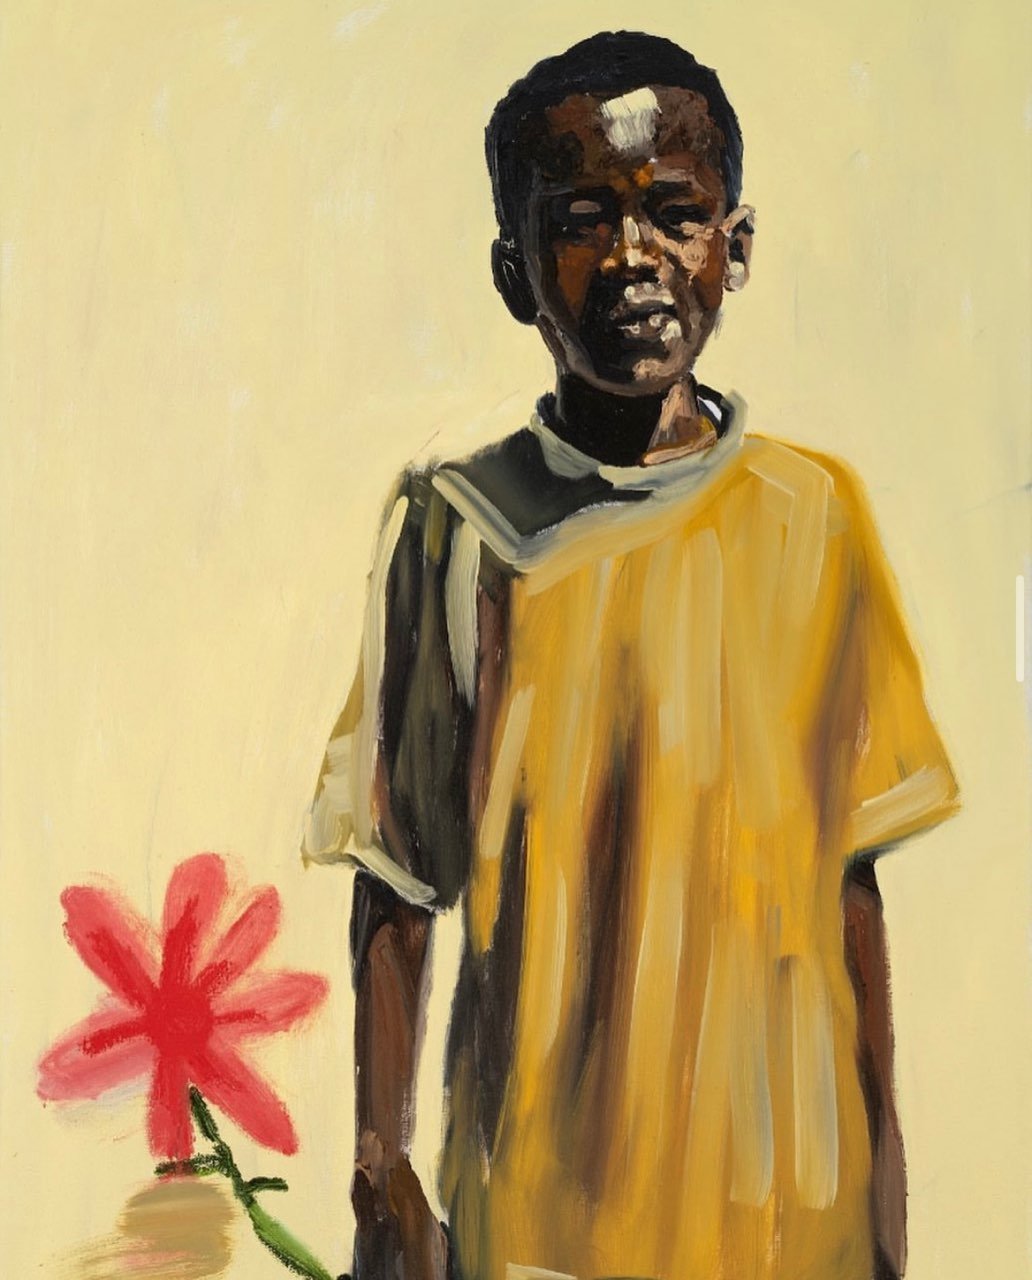   Boy in yellow shirt   Oil, oil stick on canvas  40 1/4 x 30 in  102.2 x 76.2 cm  2021 